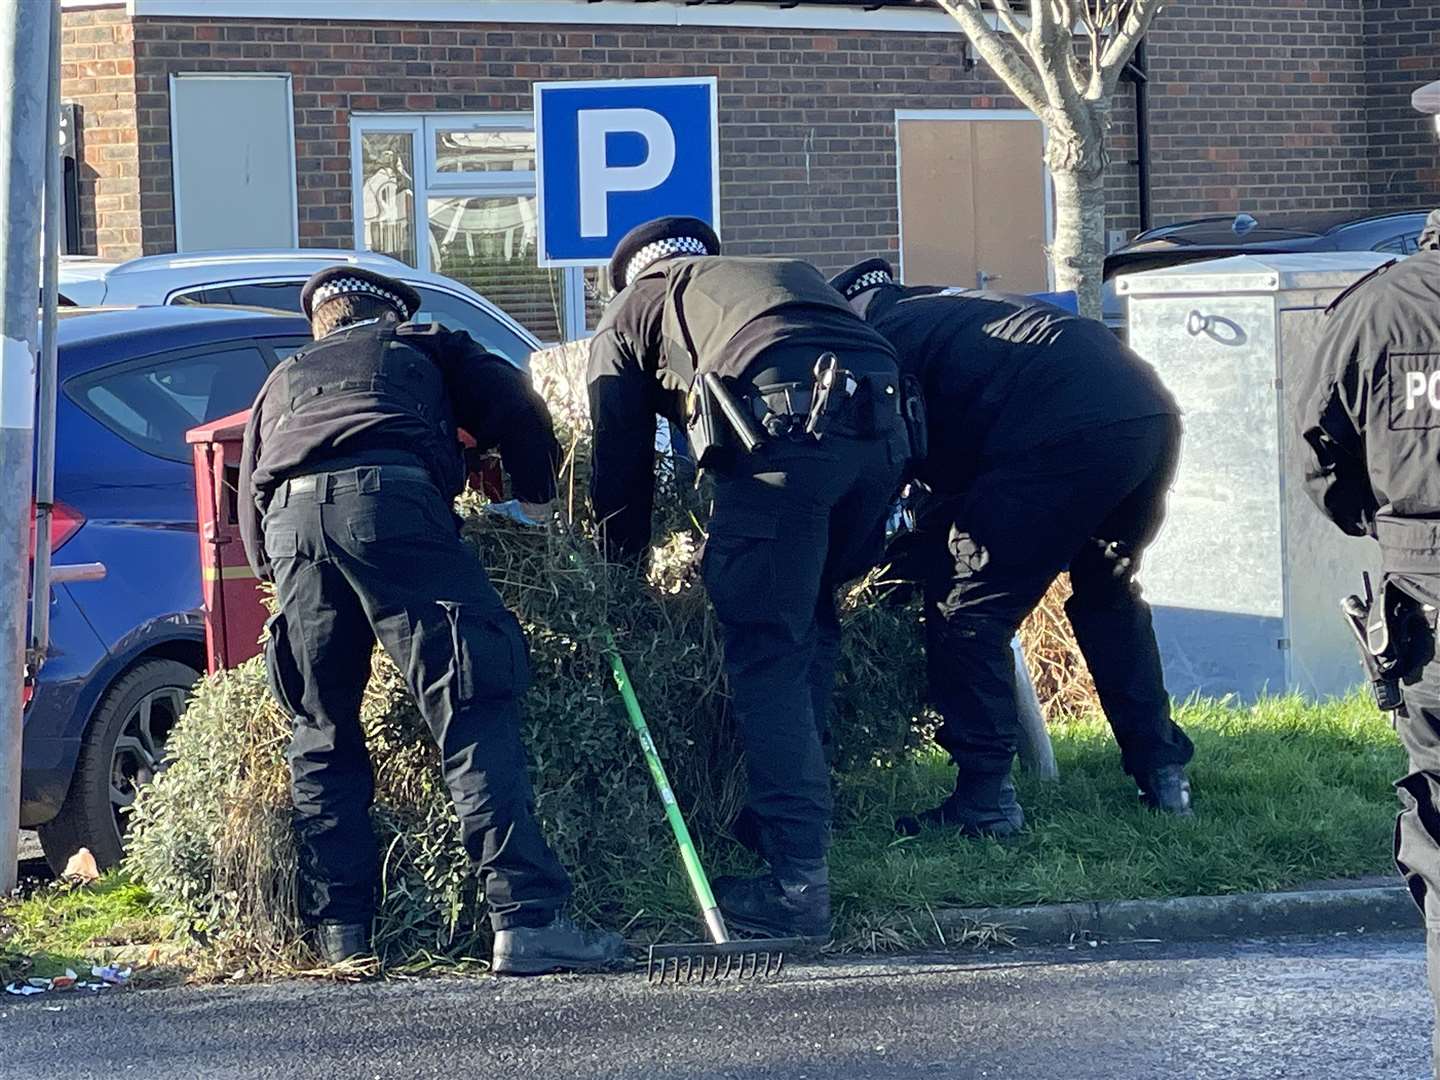 Police searched bushes following the alleged attack